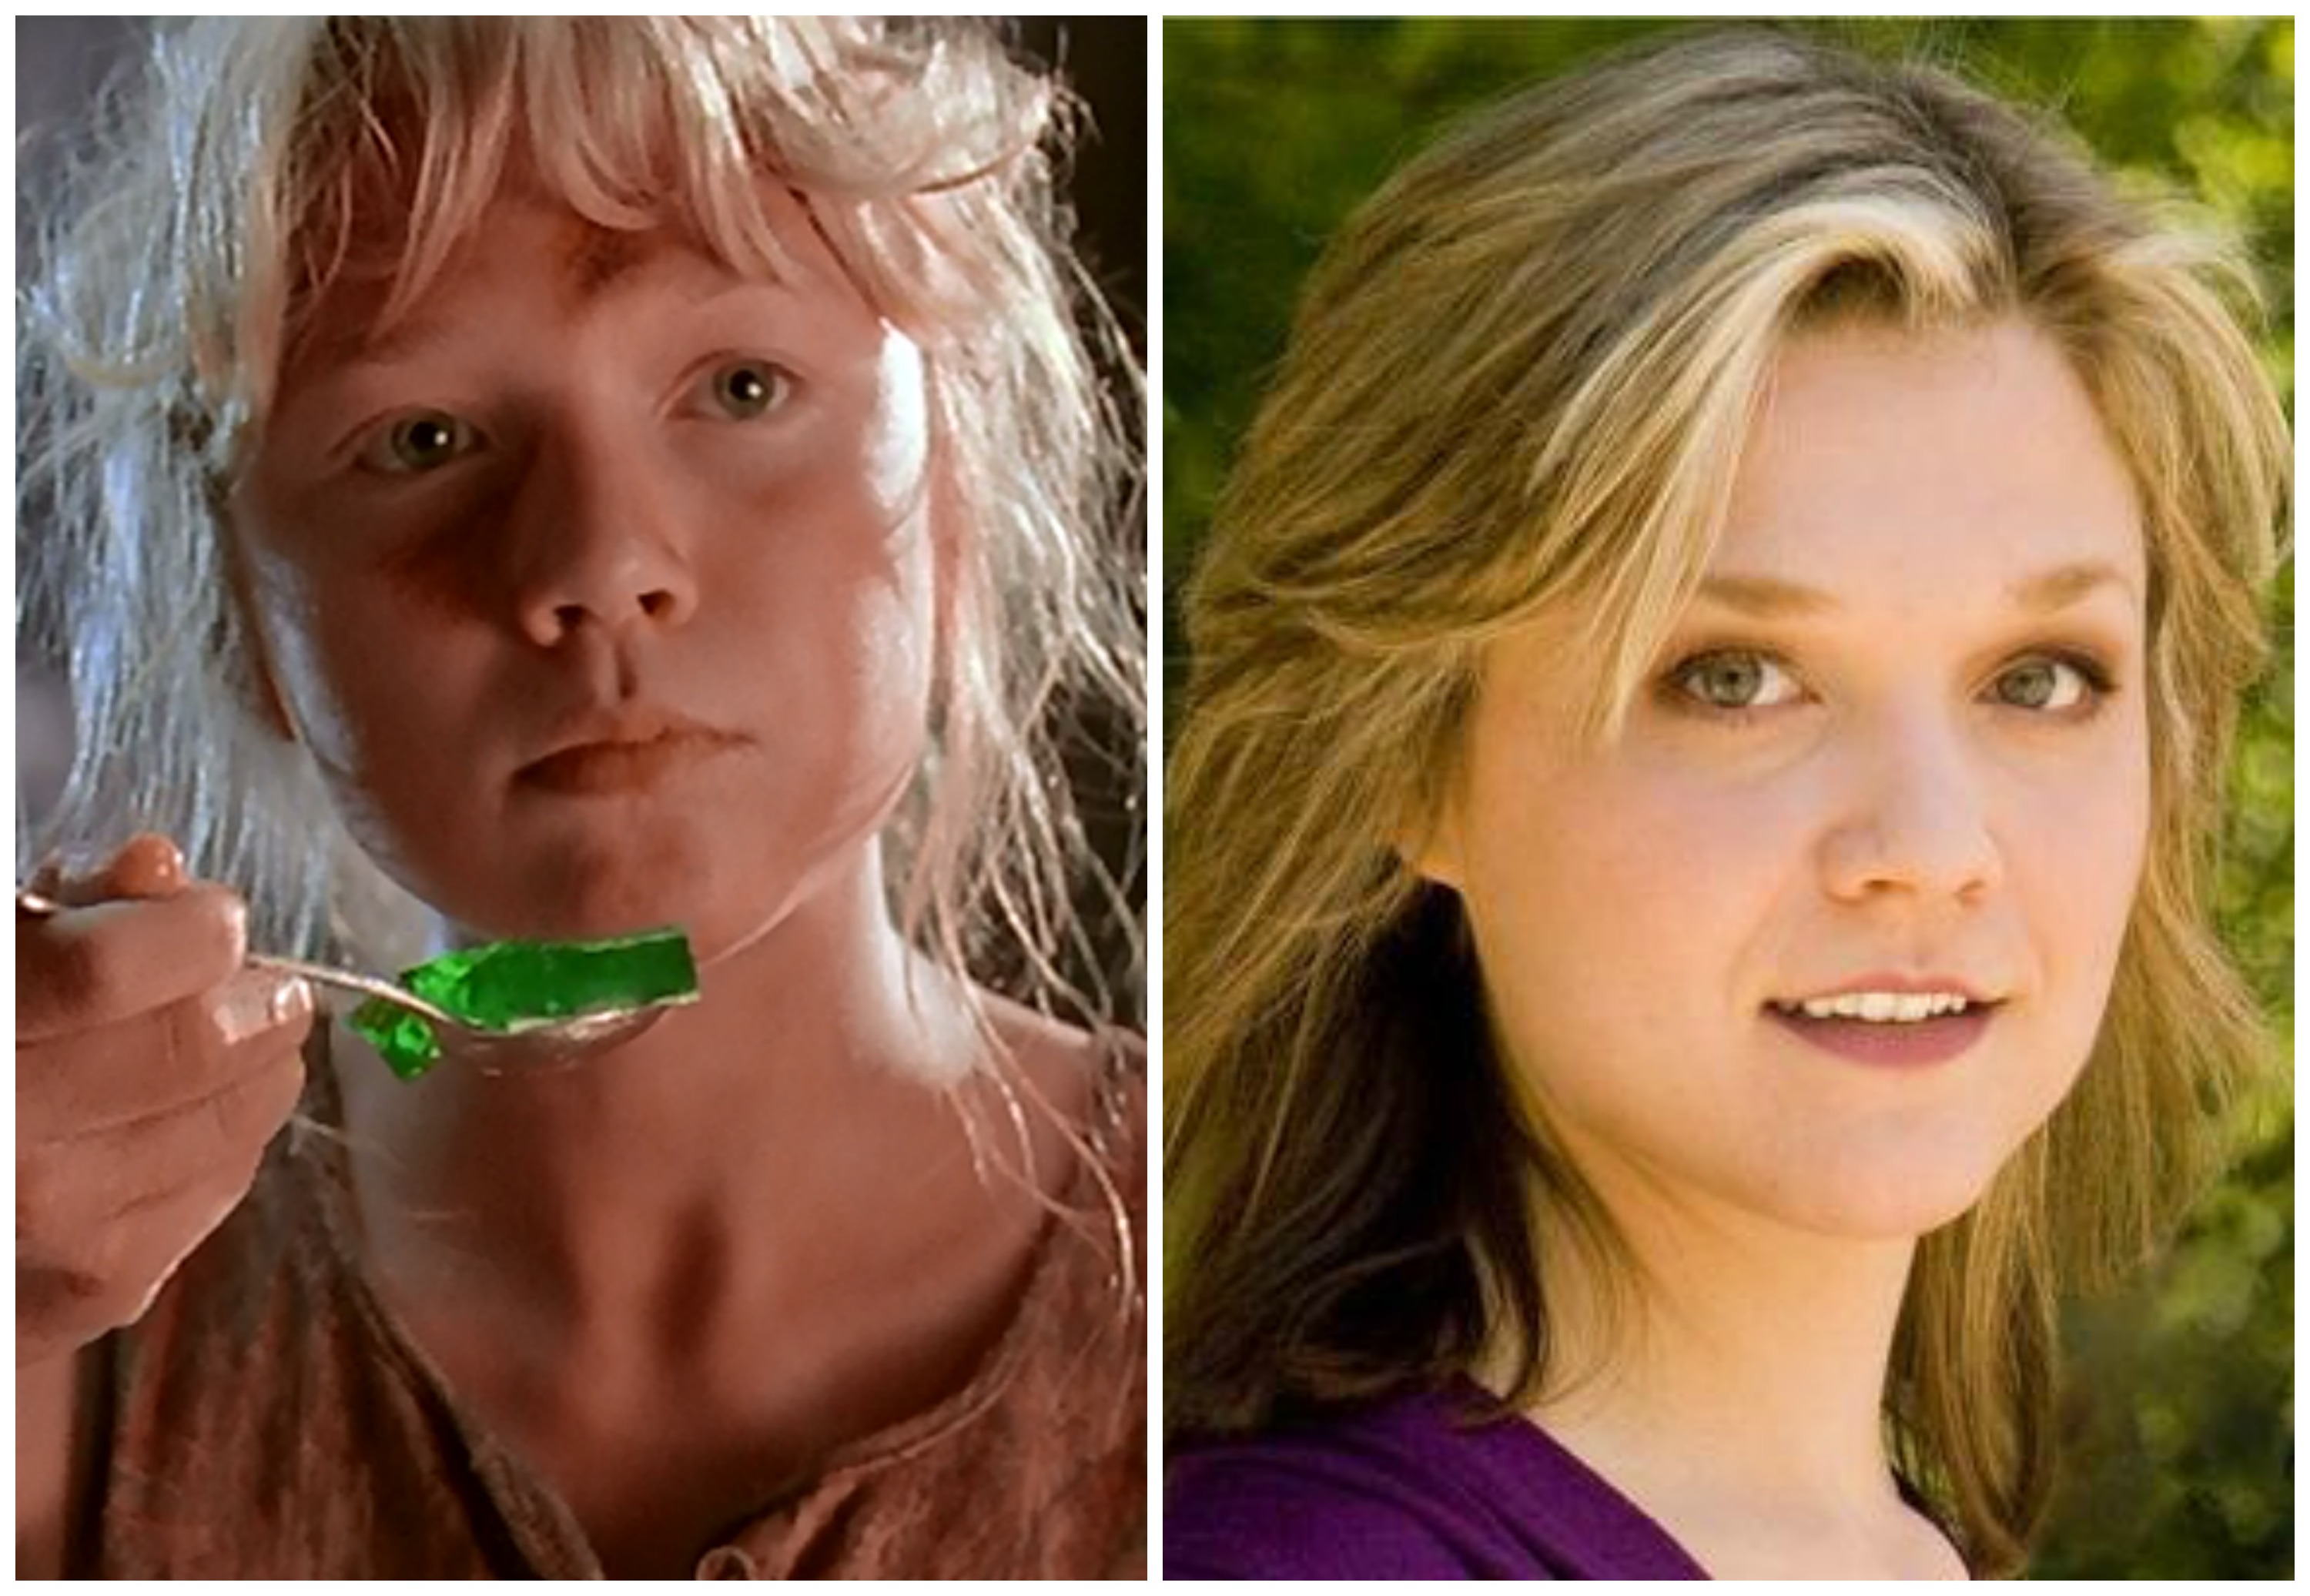 Ariana Richards — aka the Little Girl From 'Jurassic Park' — is